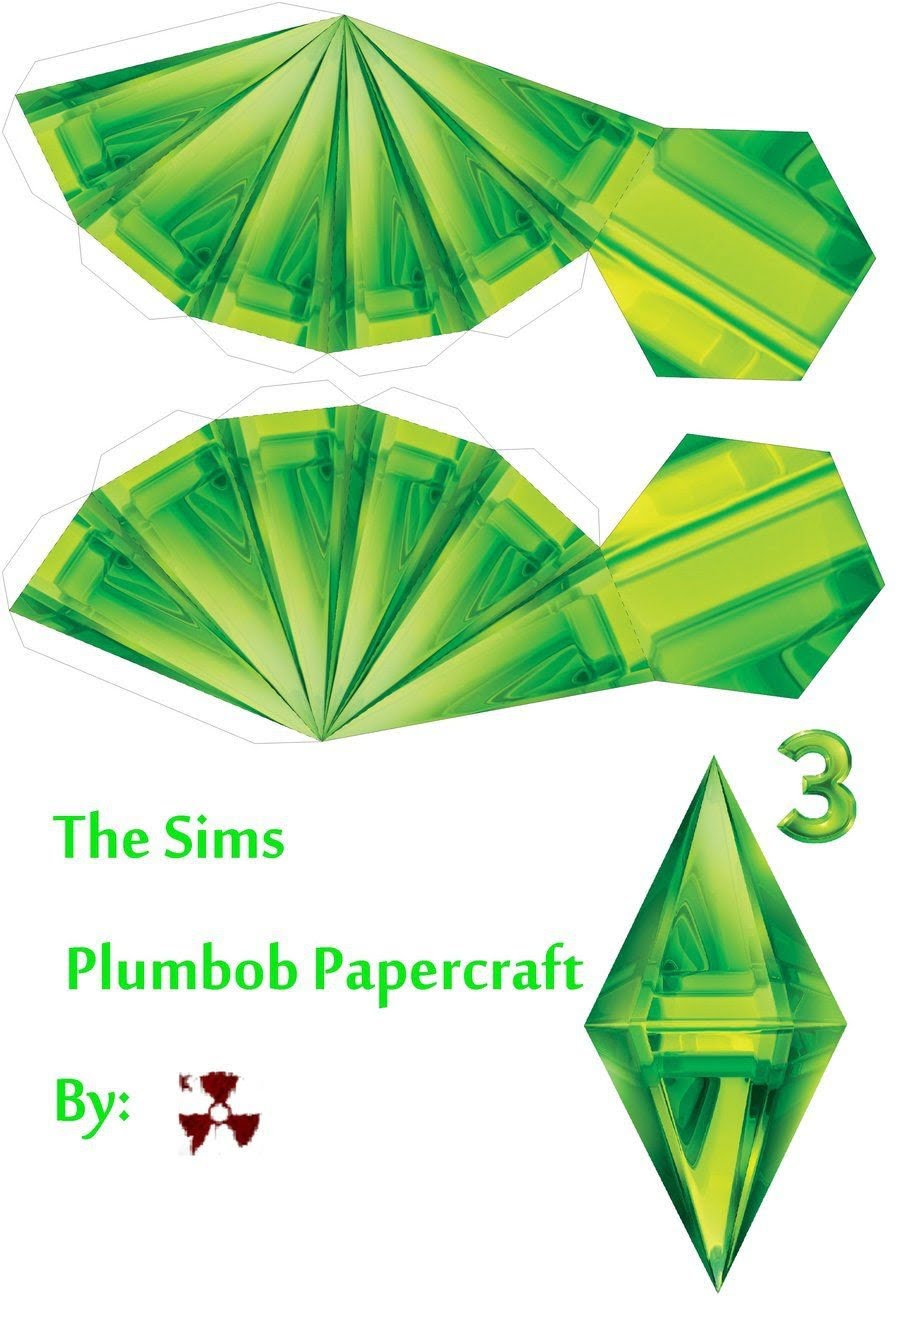 The Sims Plumbob Papercraft Template Designed By Killero Hit The Download Button For Printable Versi Sims Halloween Costume Diy Halloween Costumes Sims Costume